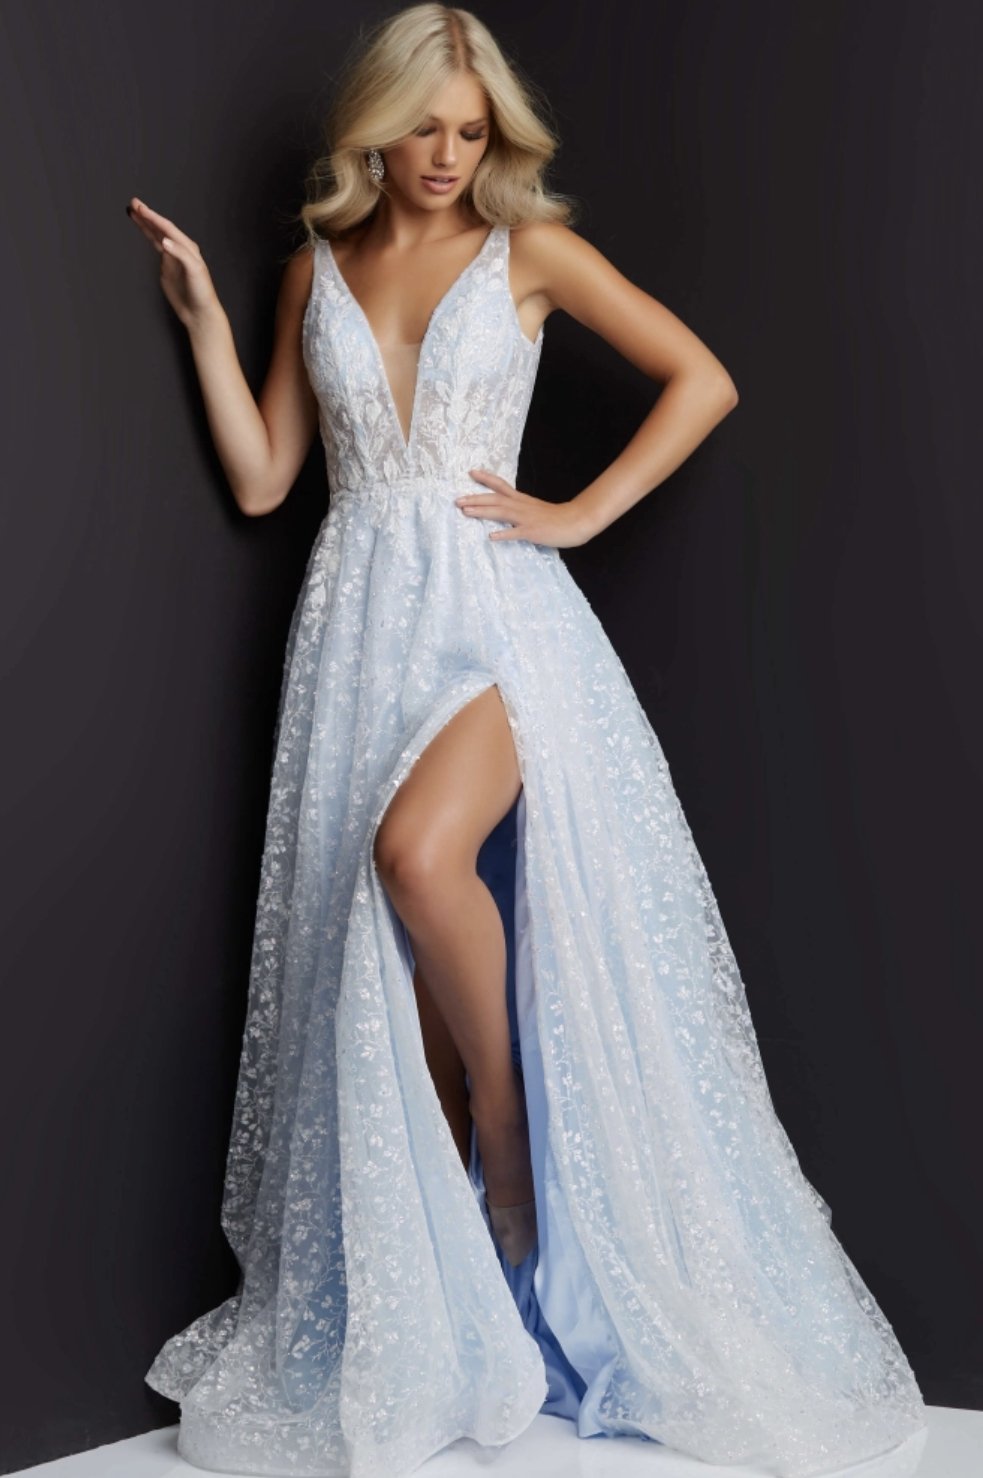 Wedding Party Dresses: 21 Chic Looks | Stunning prom dresses, Prom dresses  blue, Cute prom dresses